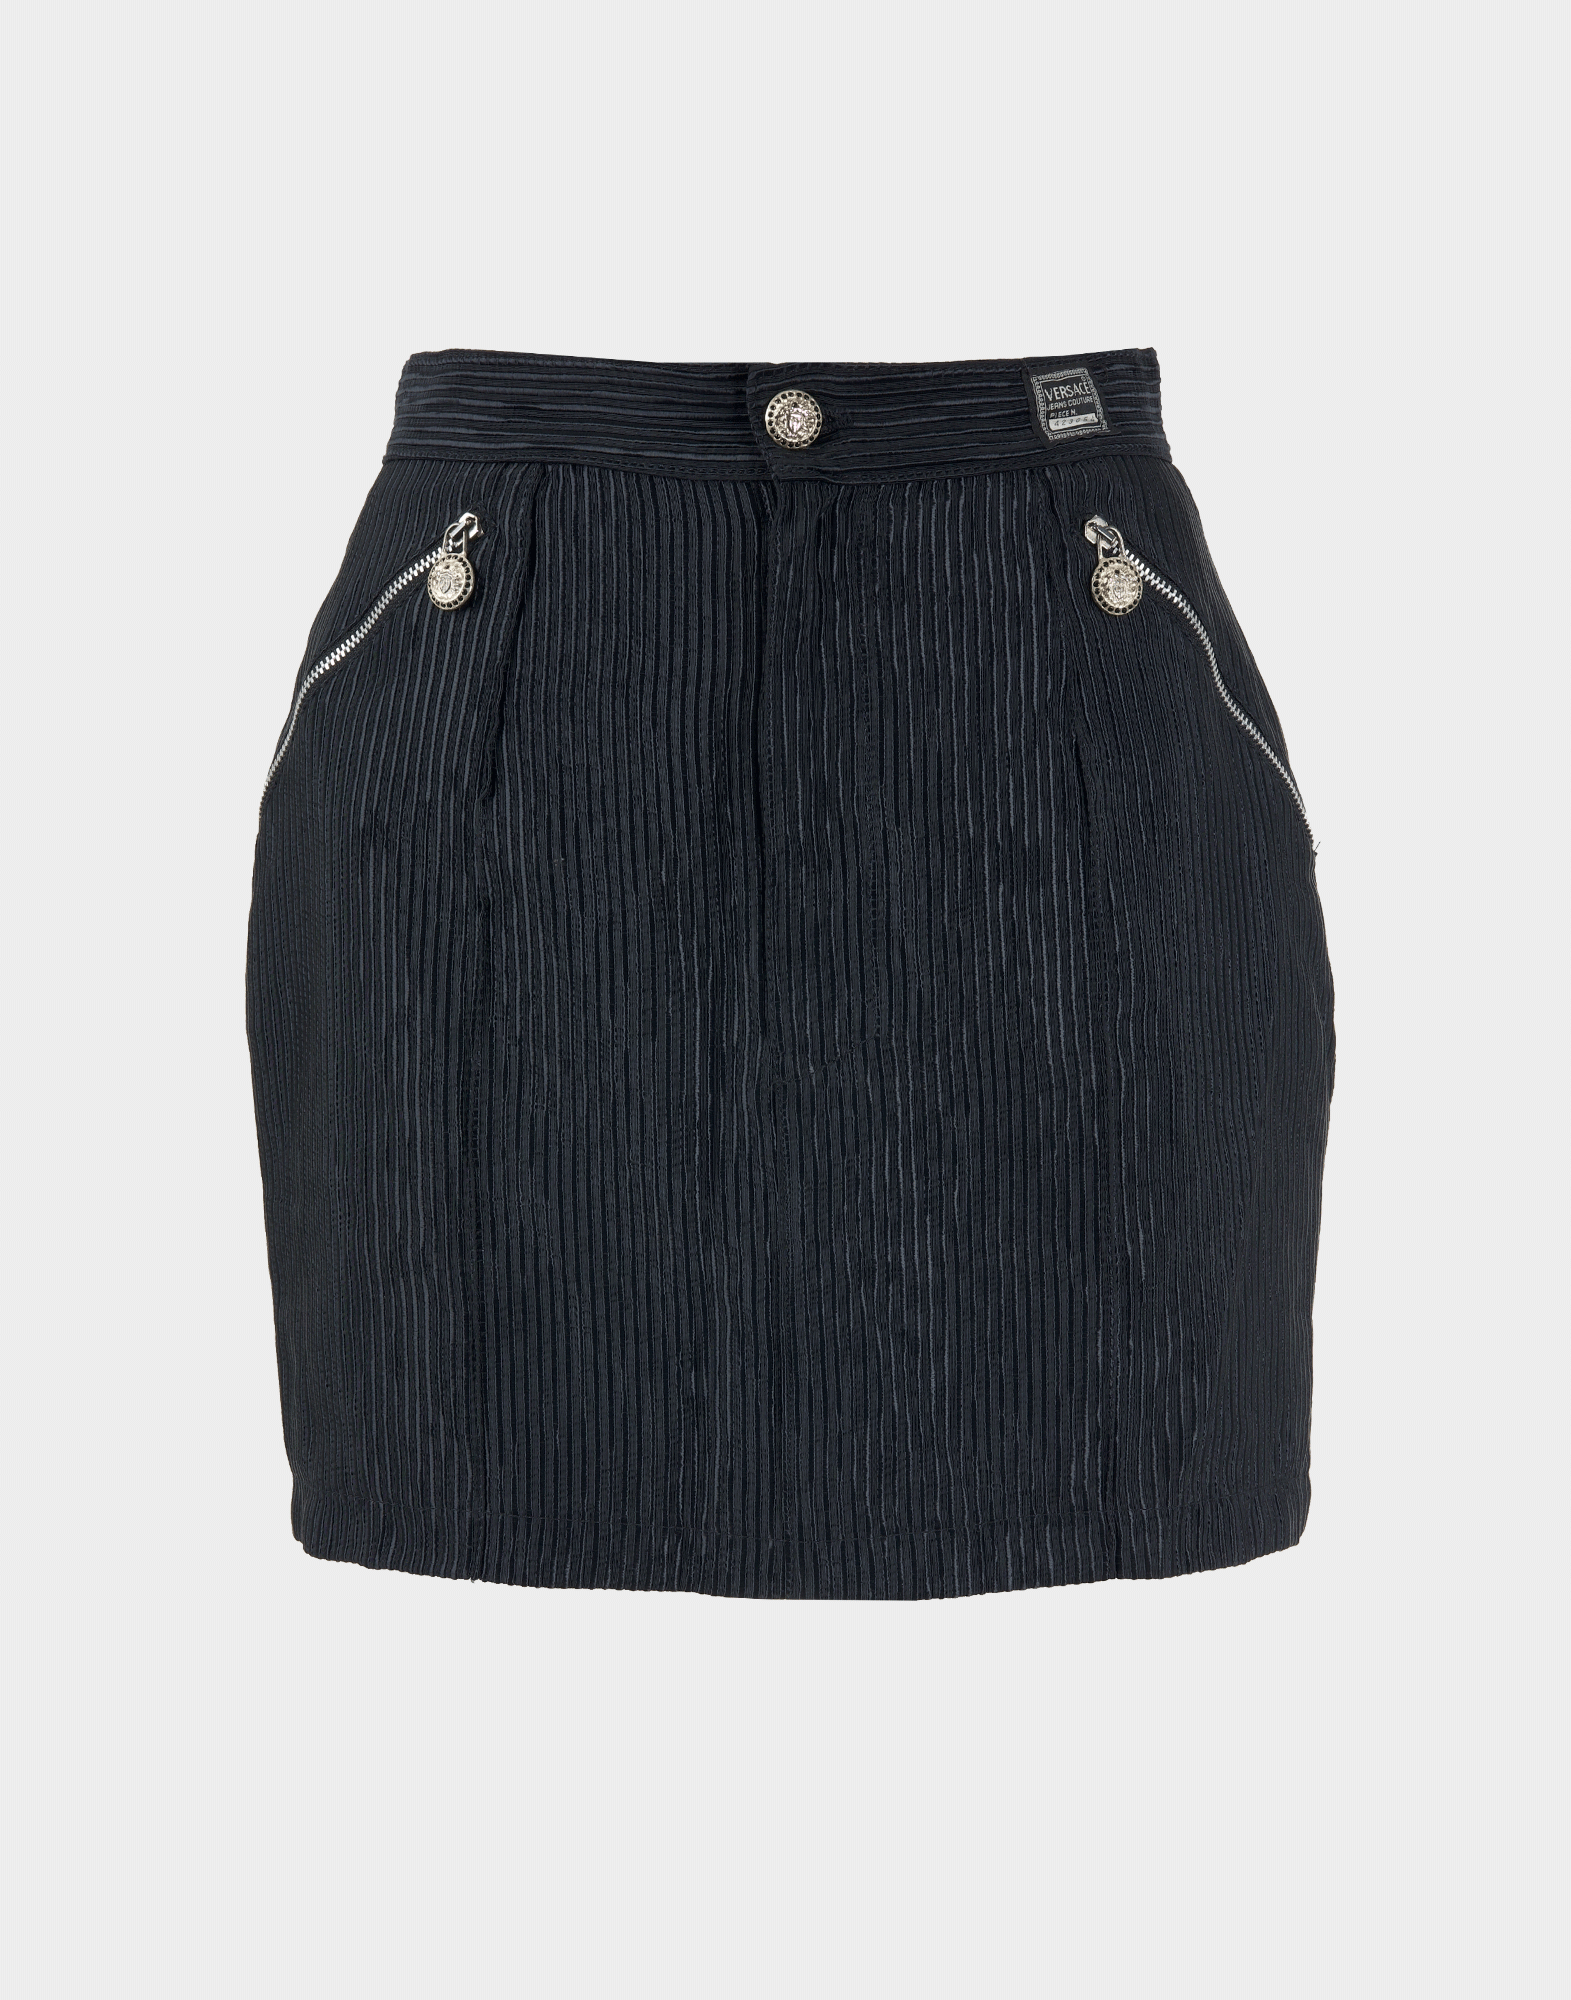 Women's black mini skirt from the '90s, button closure and zippered pockets